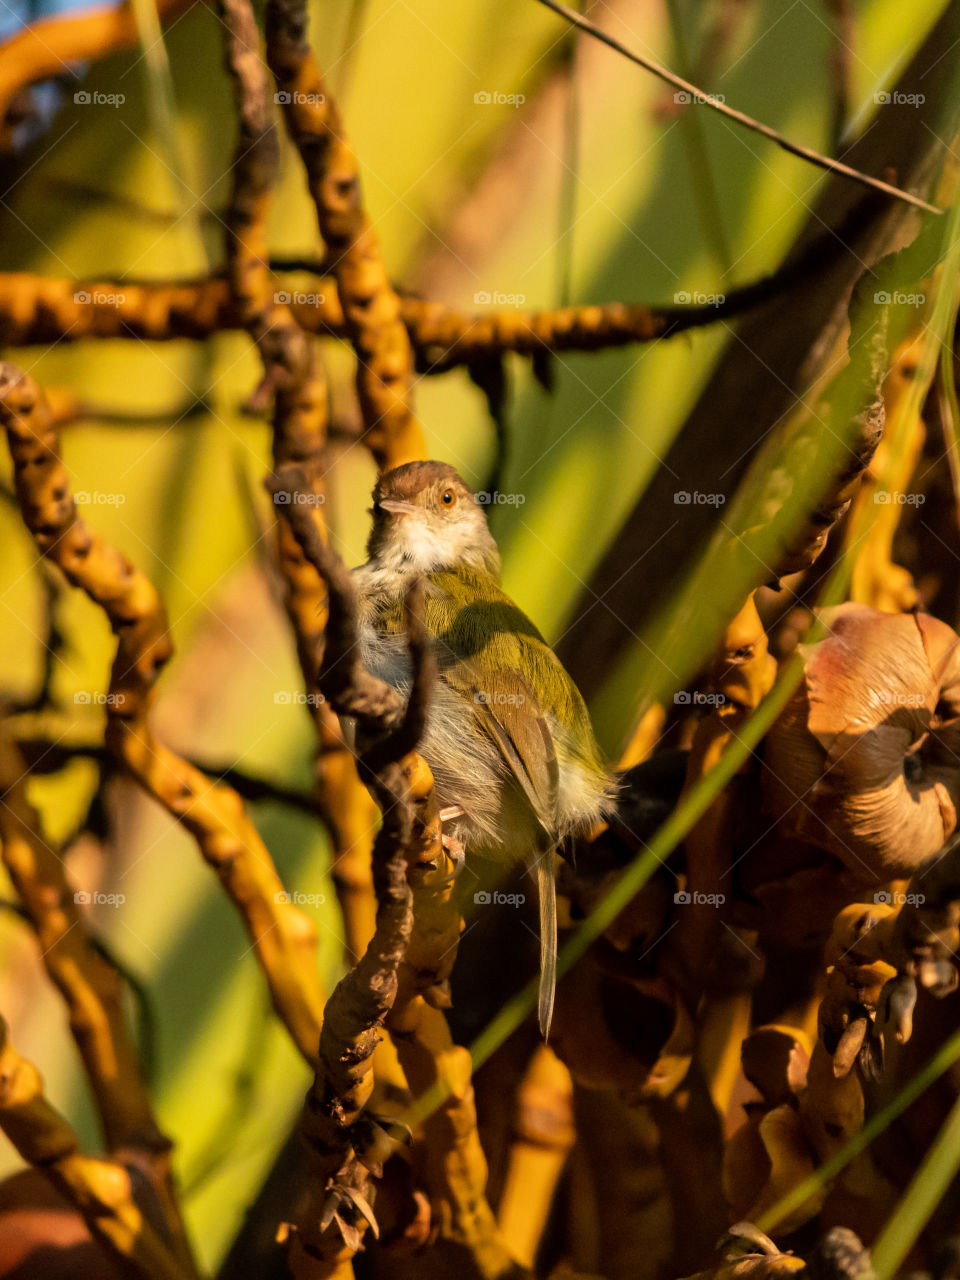 The common tailorbird is a songbird found across tropical Asia. Popular for its nest made of leaves "sewn" together and immortalised by Rudyard Kipling as Darzee in his Jungle Book, it is a common resident in urban gardens.